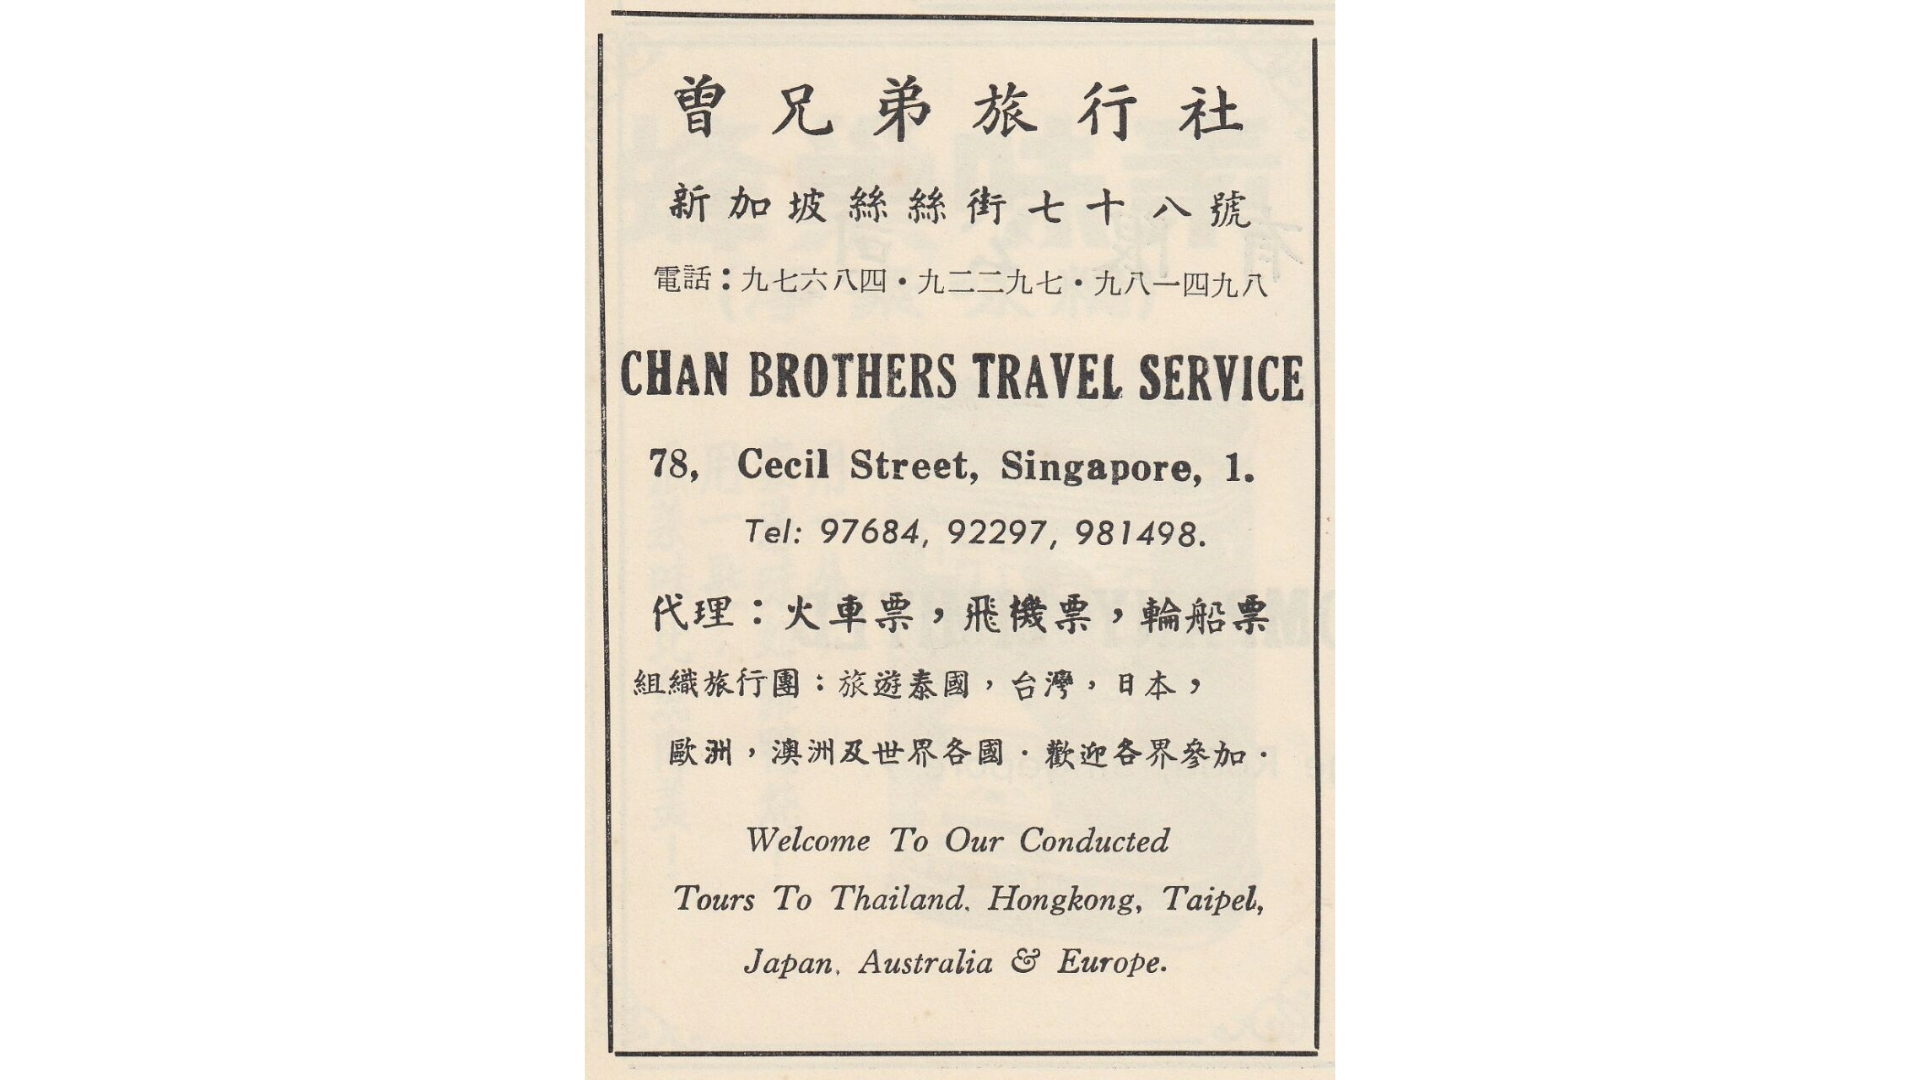 Travel-During-the-1960s-90s-Around-the-World-with-Chan-Brothers-Travel